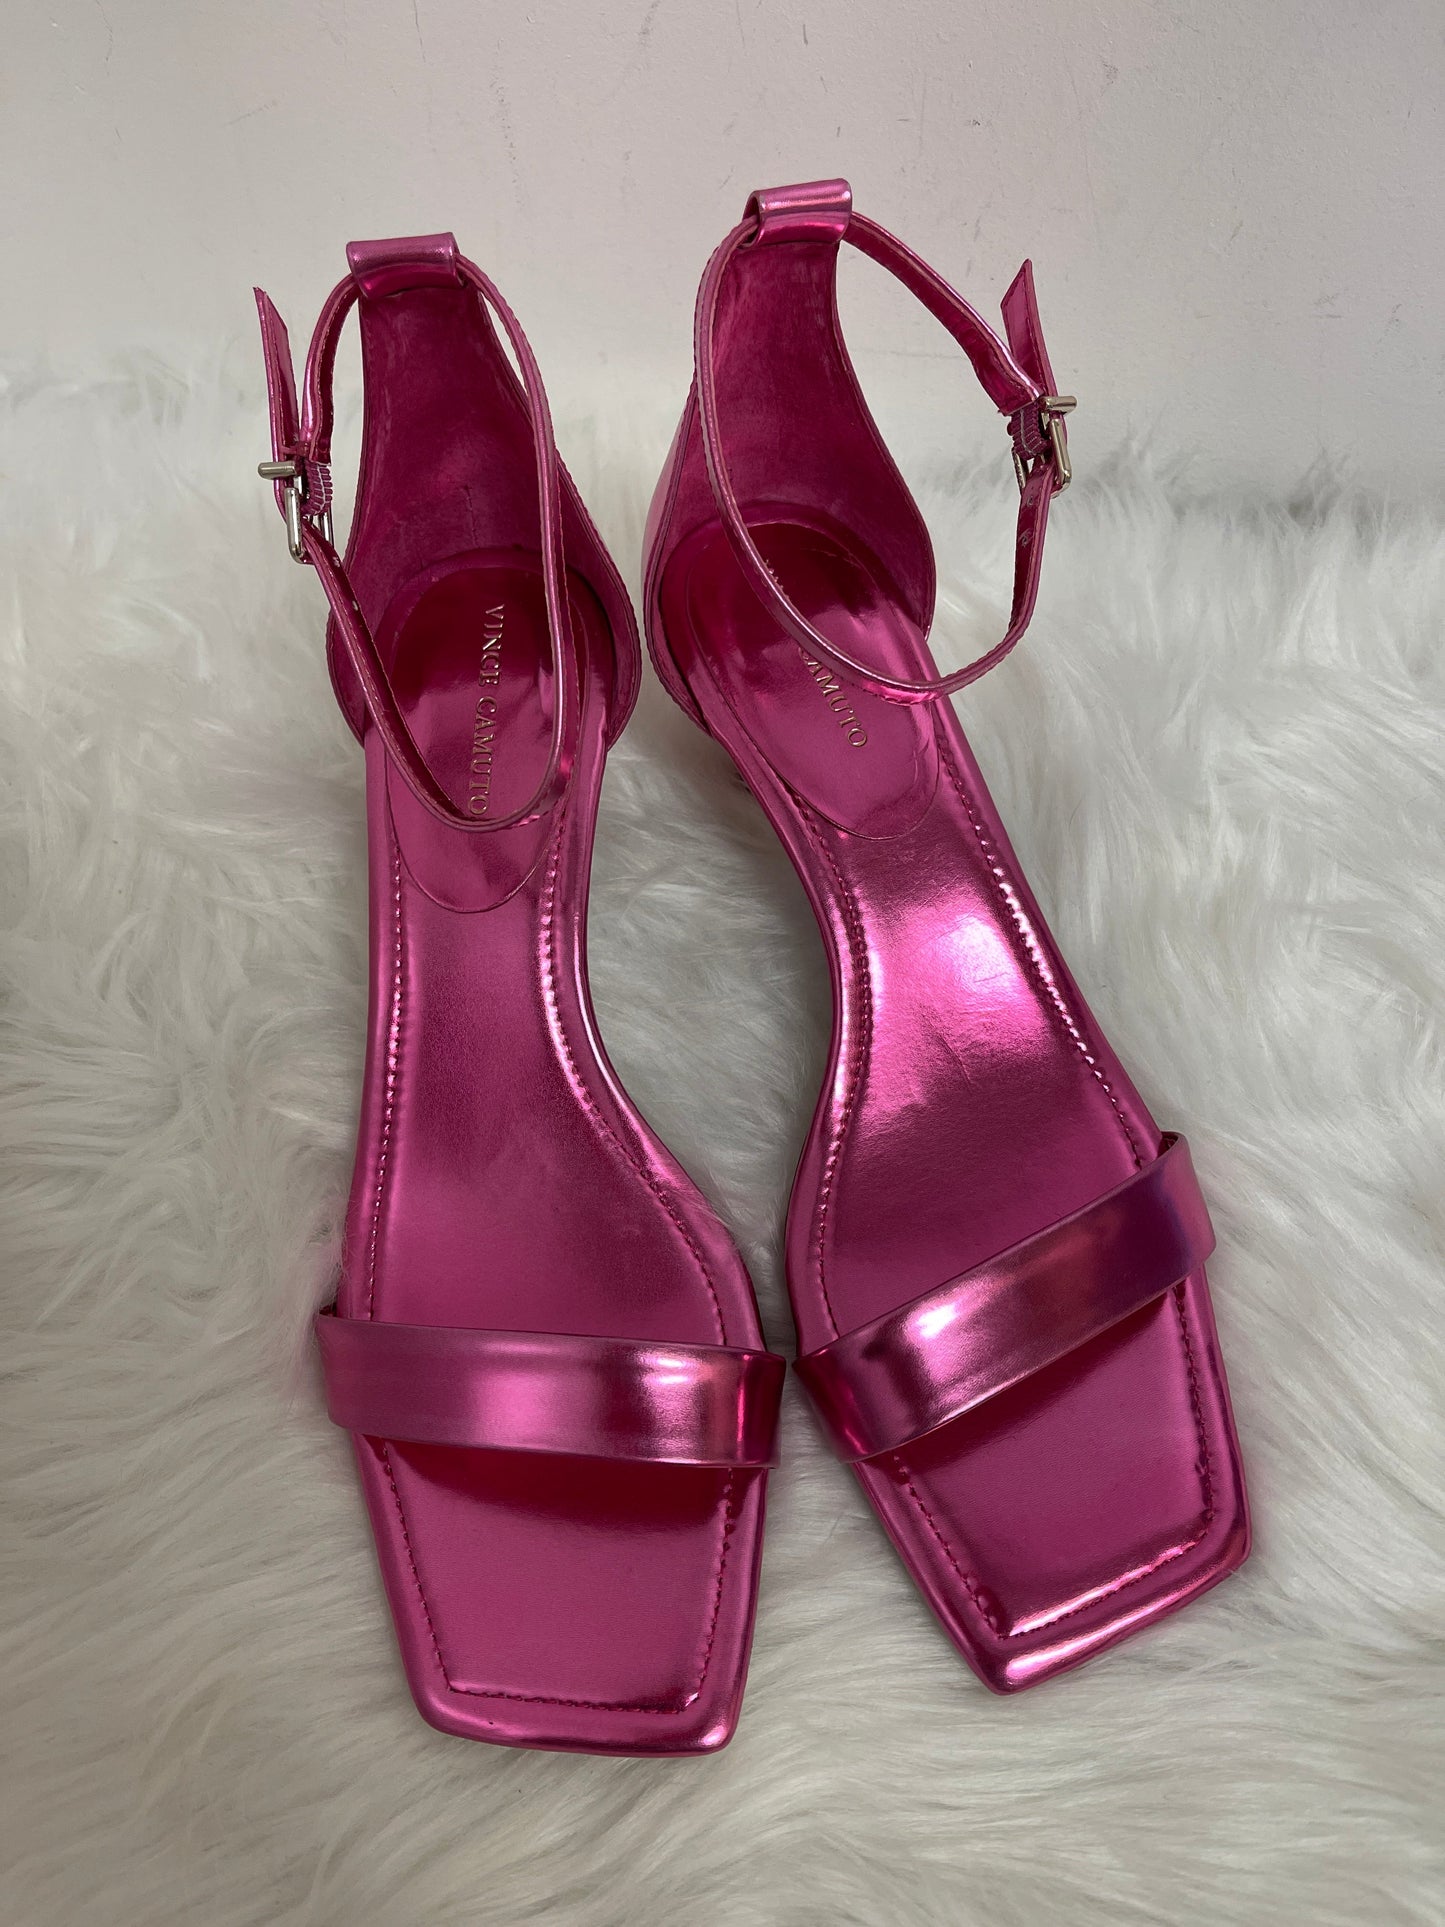 Pink Shoes Heels Stiletto Vince Camuto, Size 10